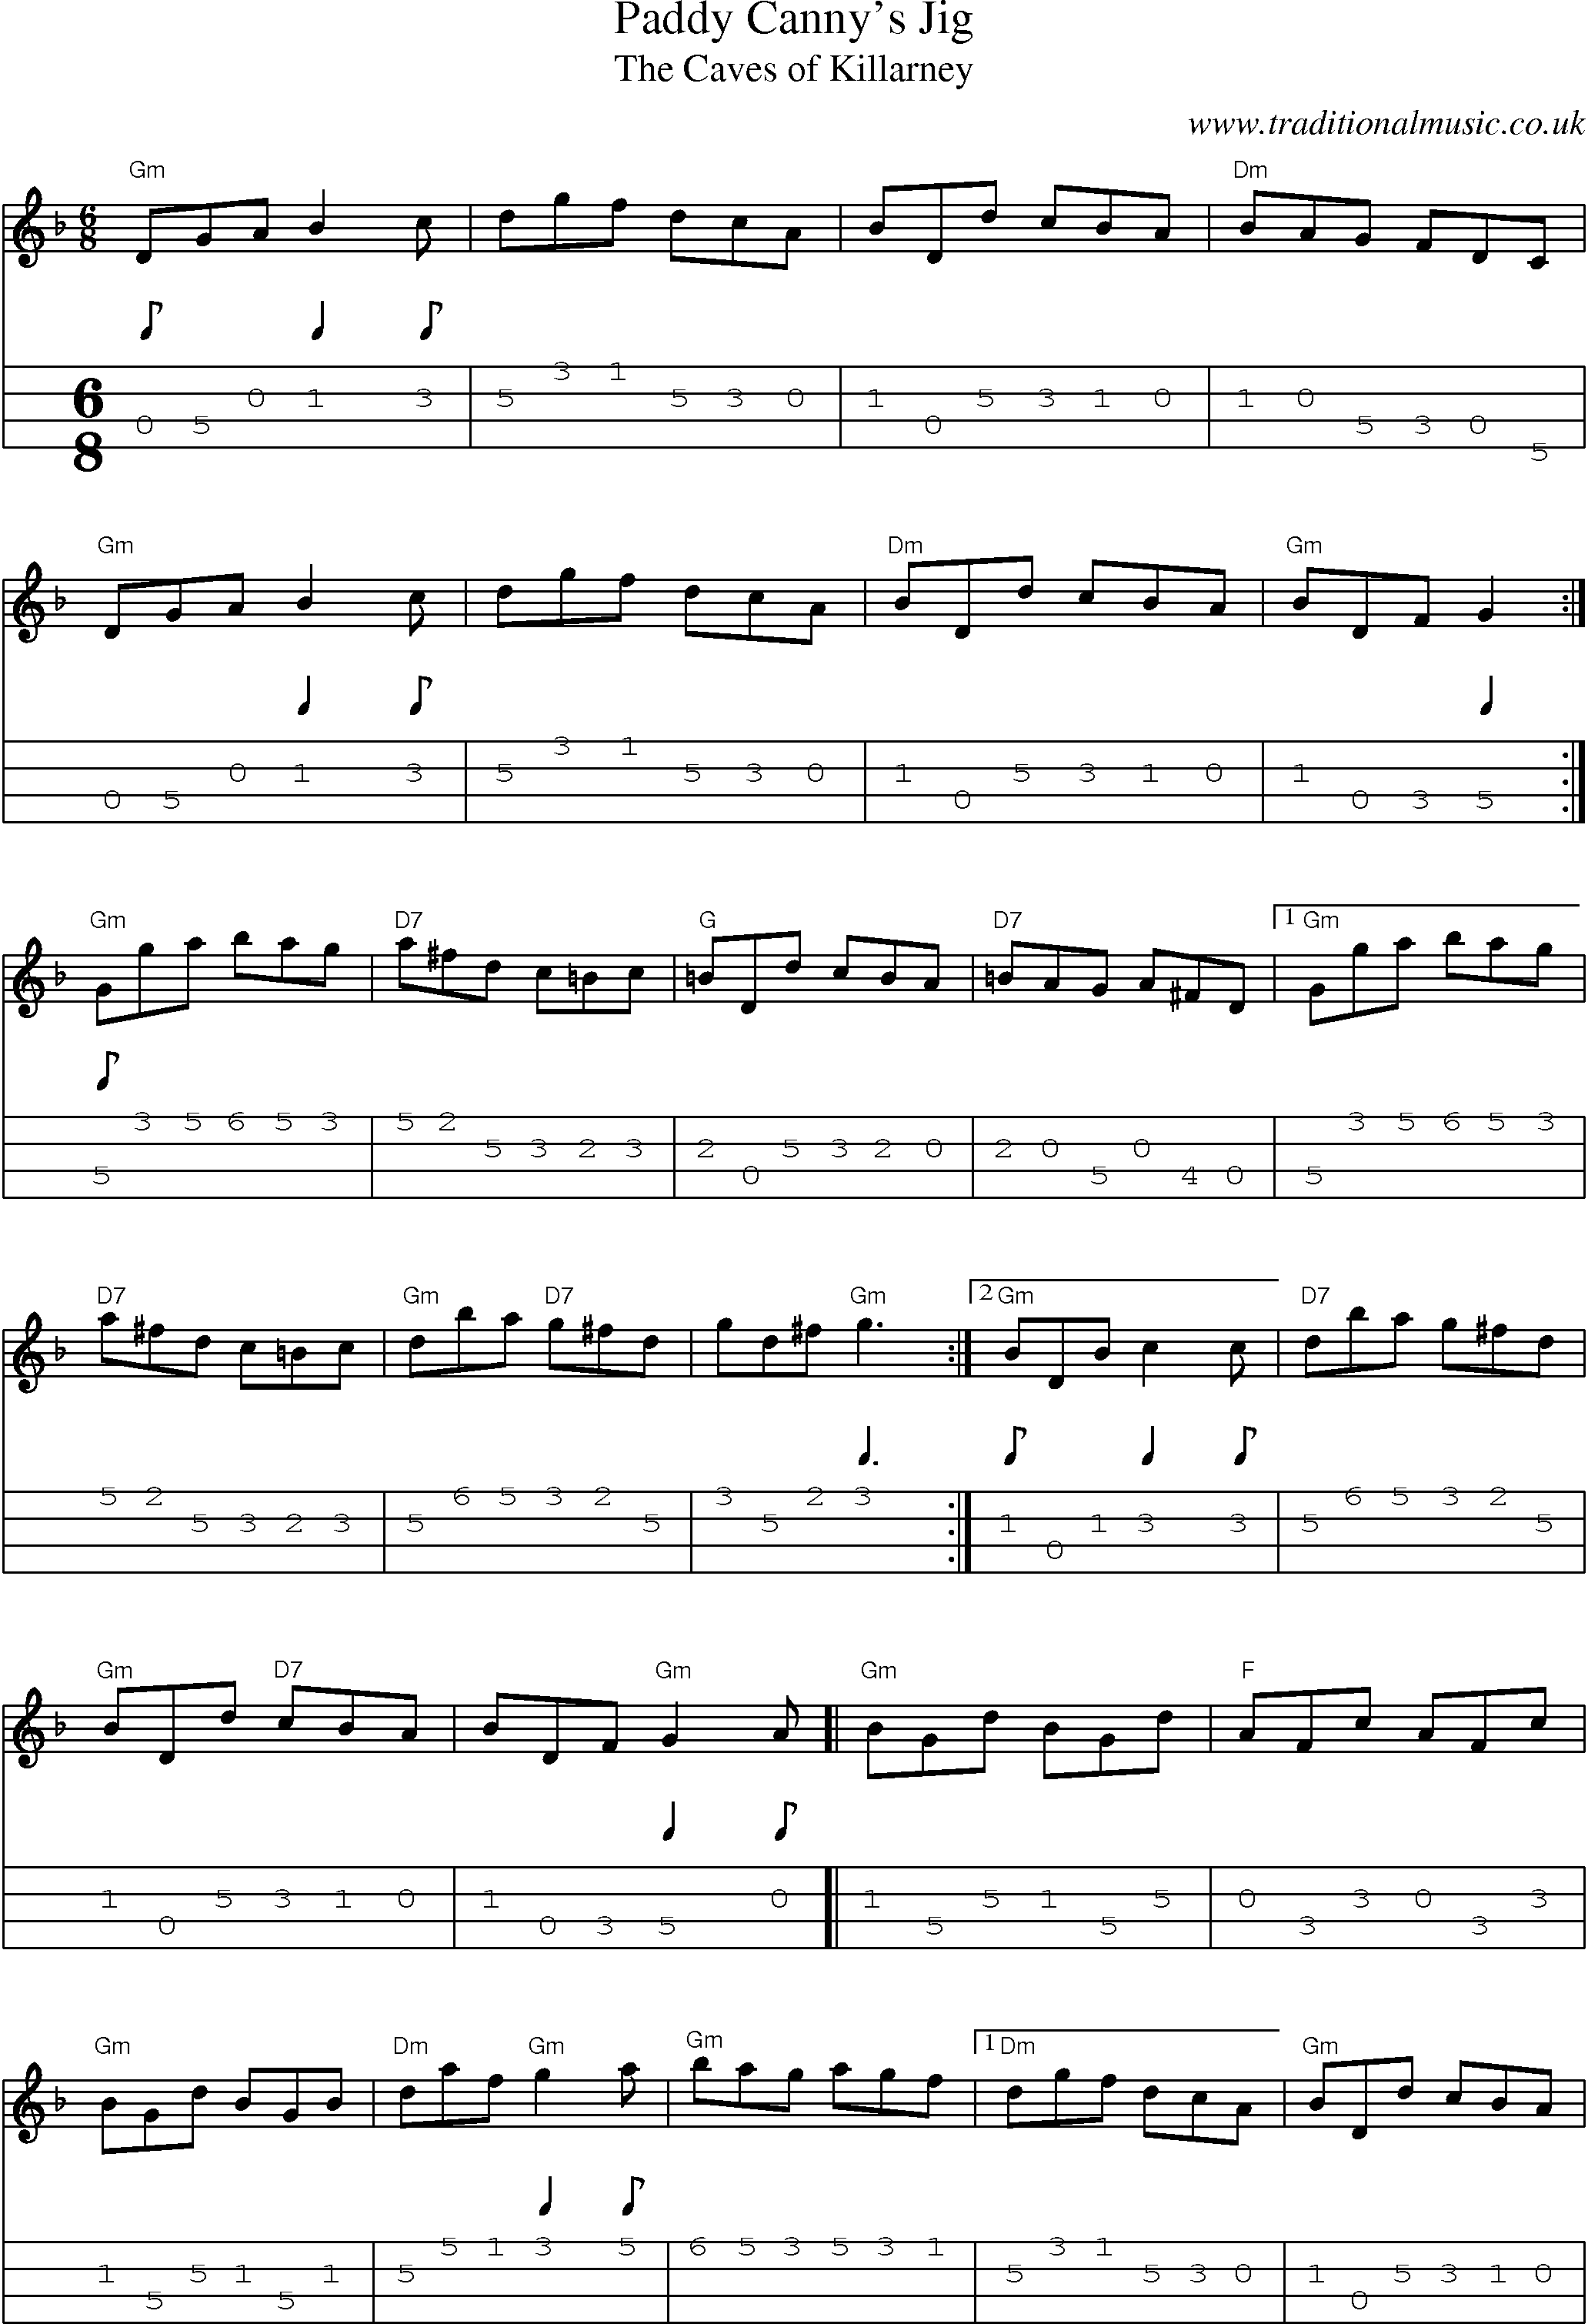 Music Score and Mandolin Tabs for Paddy Cannys Jig